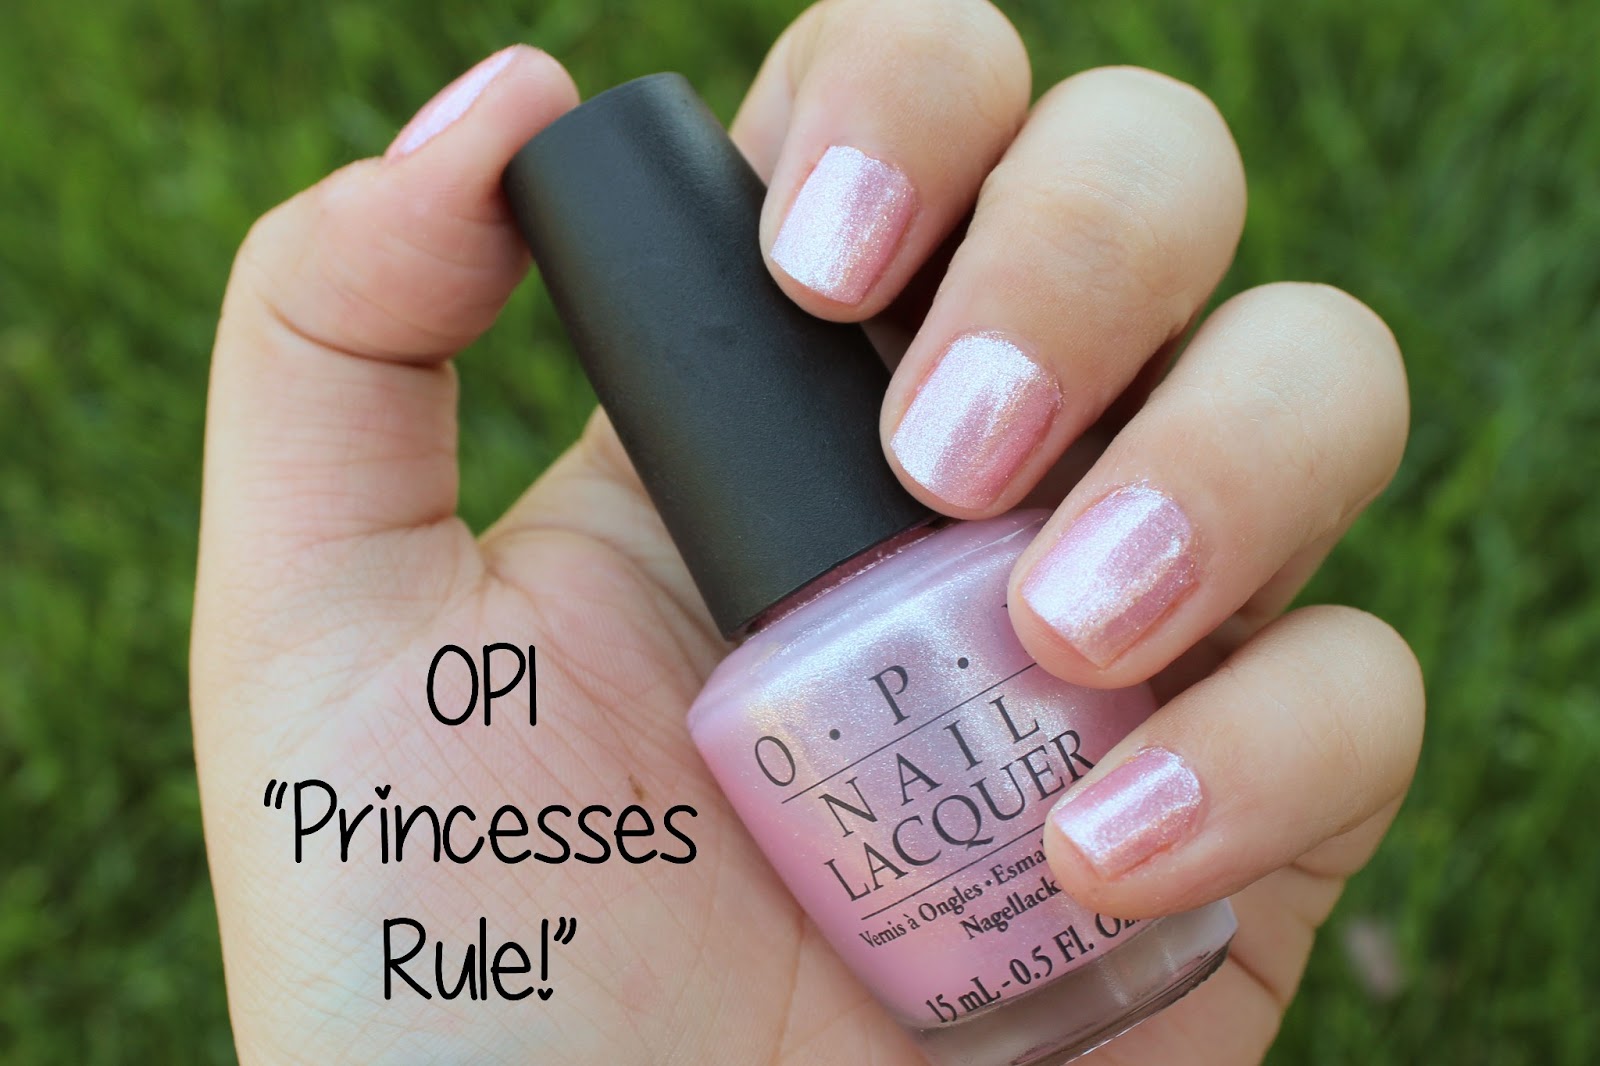 1. OPI Nail Lacquer in "Princesses Rule!" - wide 3